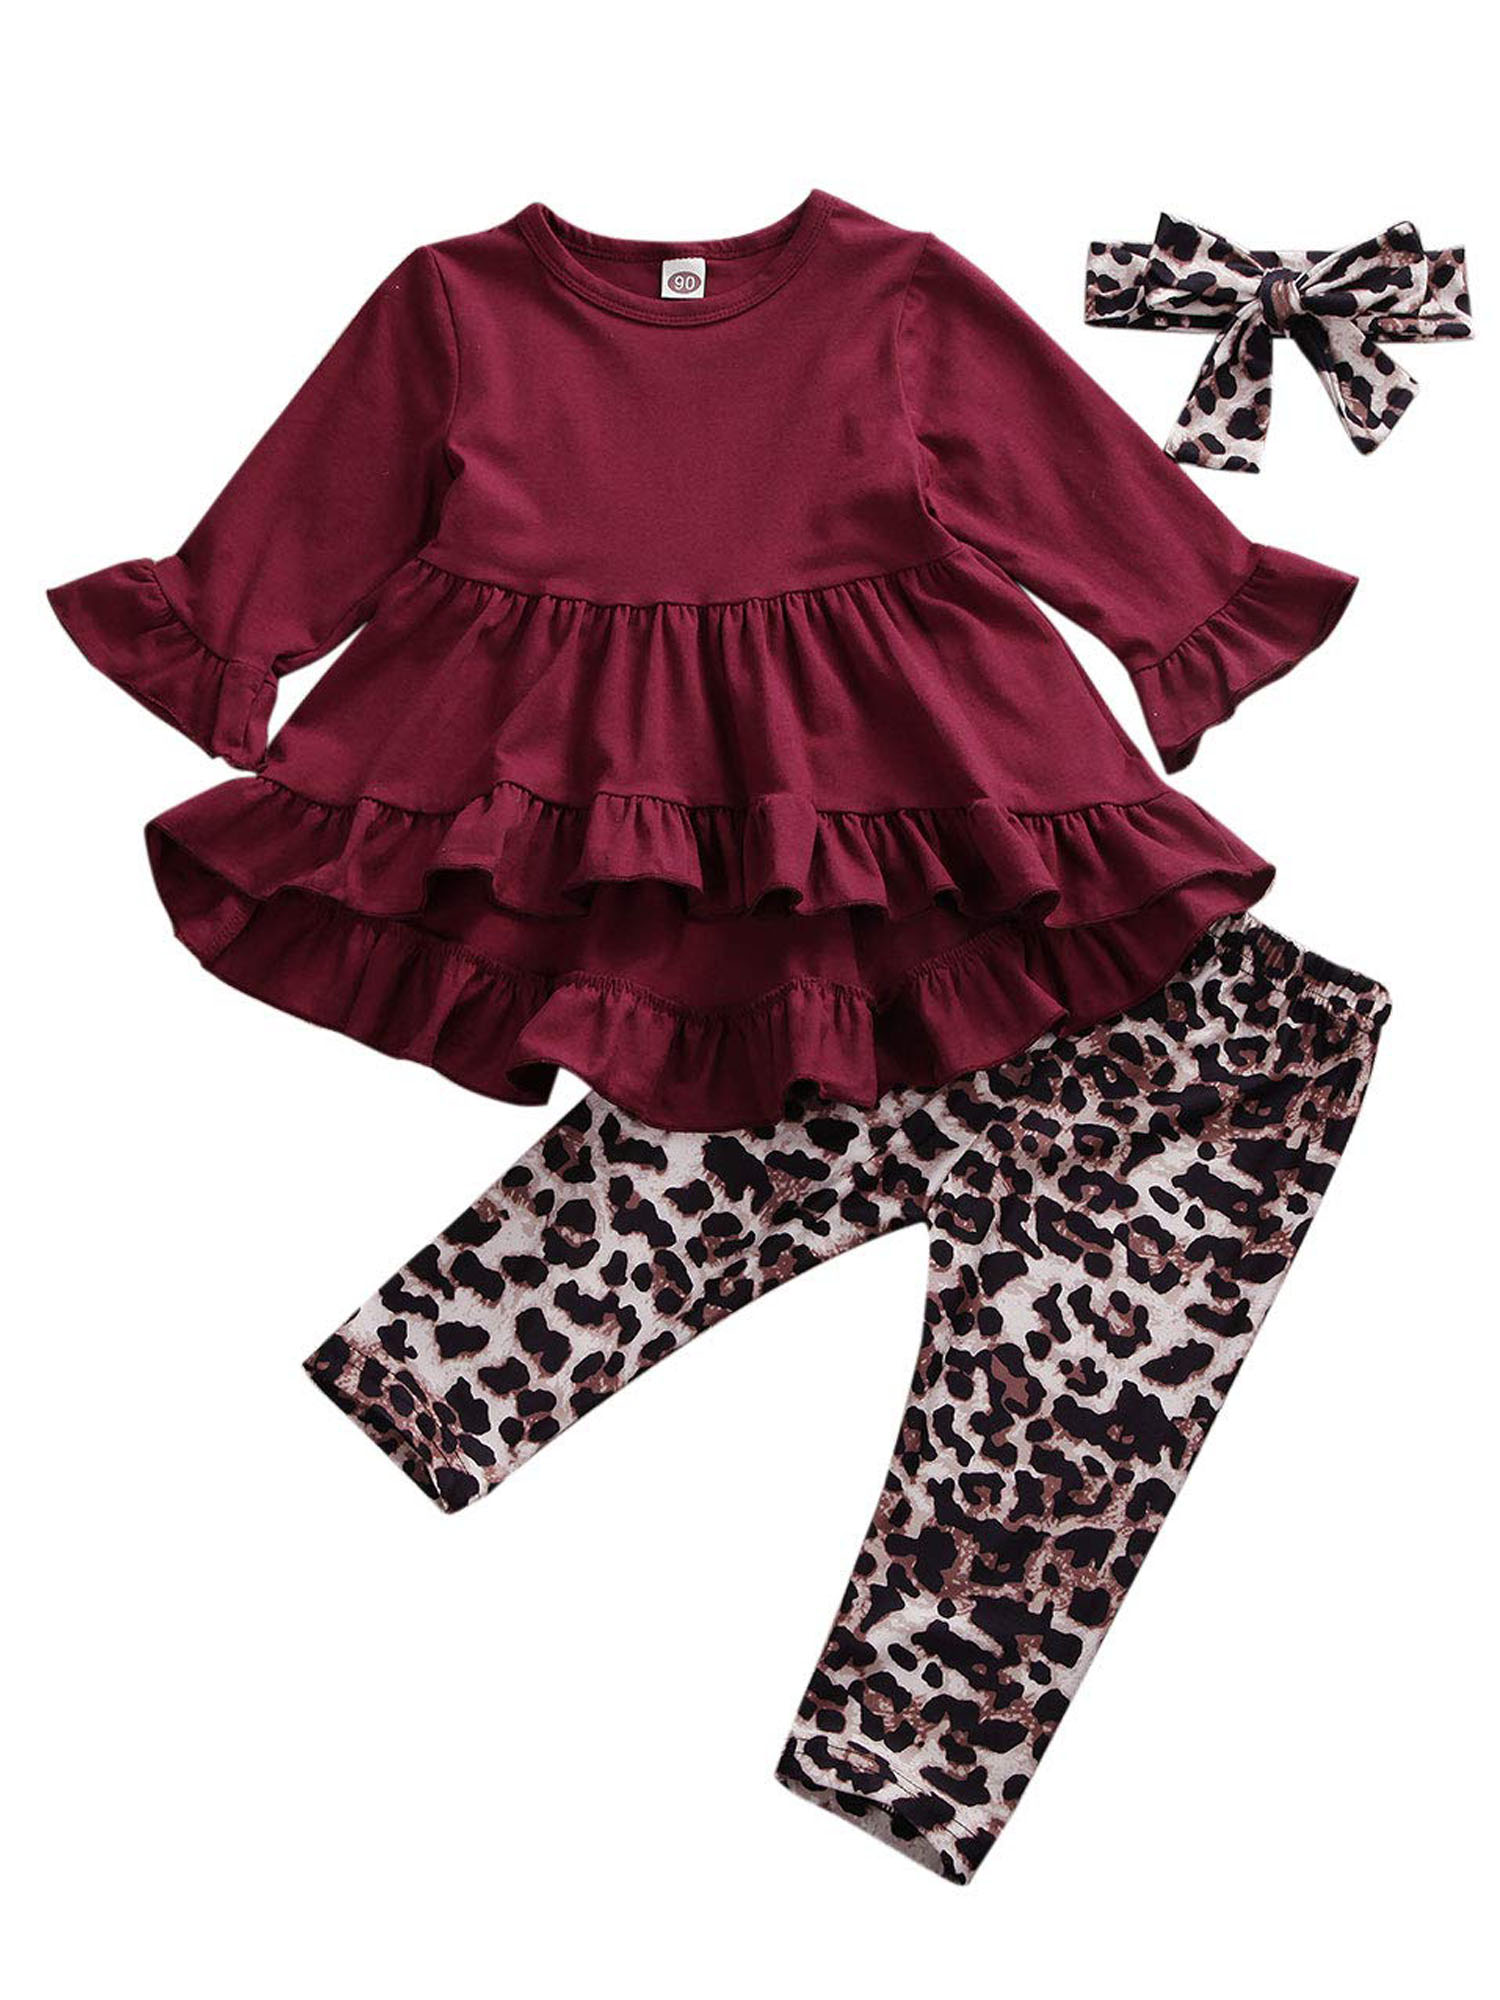 Dewadbow Boutique Kid Baby Girl Leopard Clothes Top T-shirt Dress Legging Pants Outfit - image 1 of 5